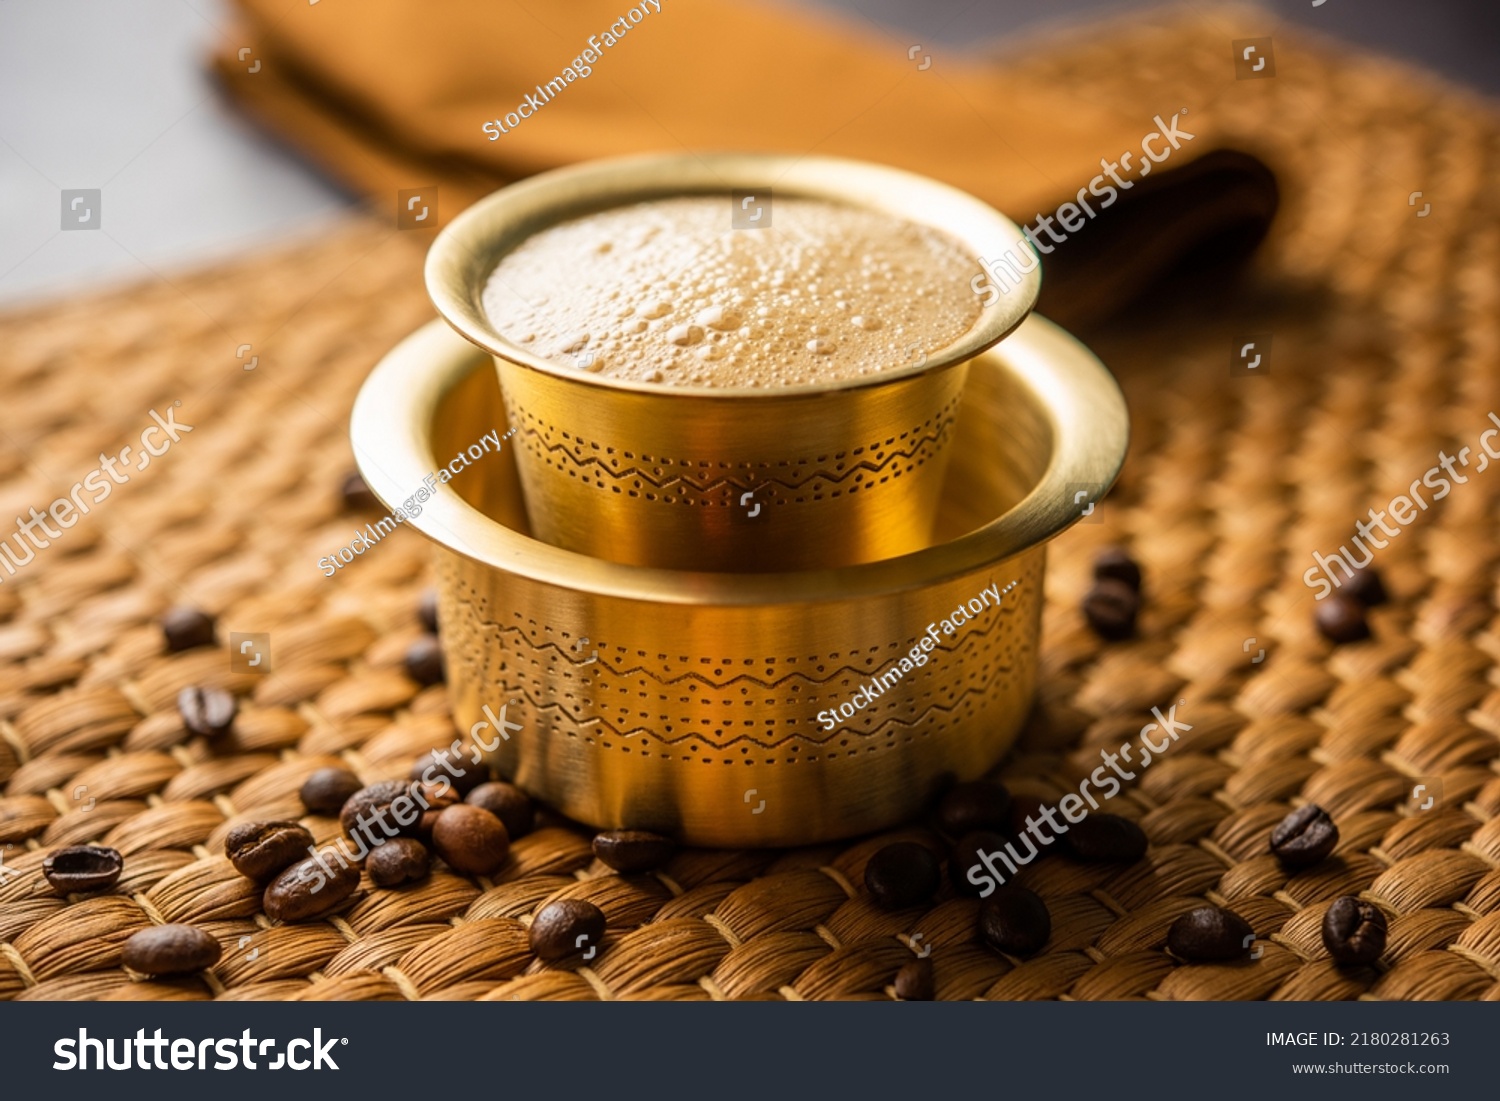 South Indian Filter coffee served in a traditional brass or stainless steel cup #2180281263